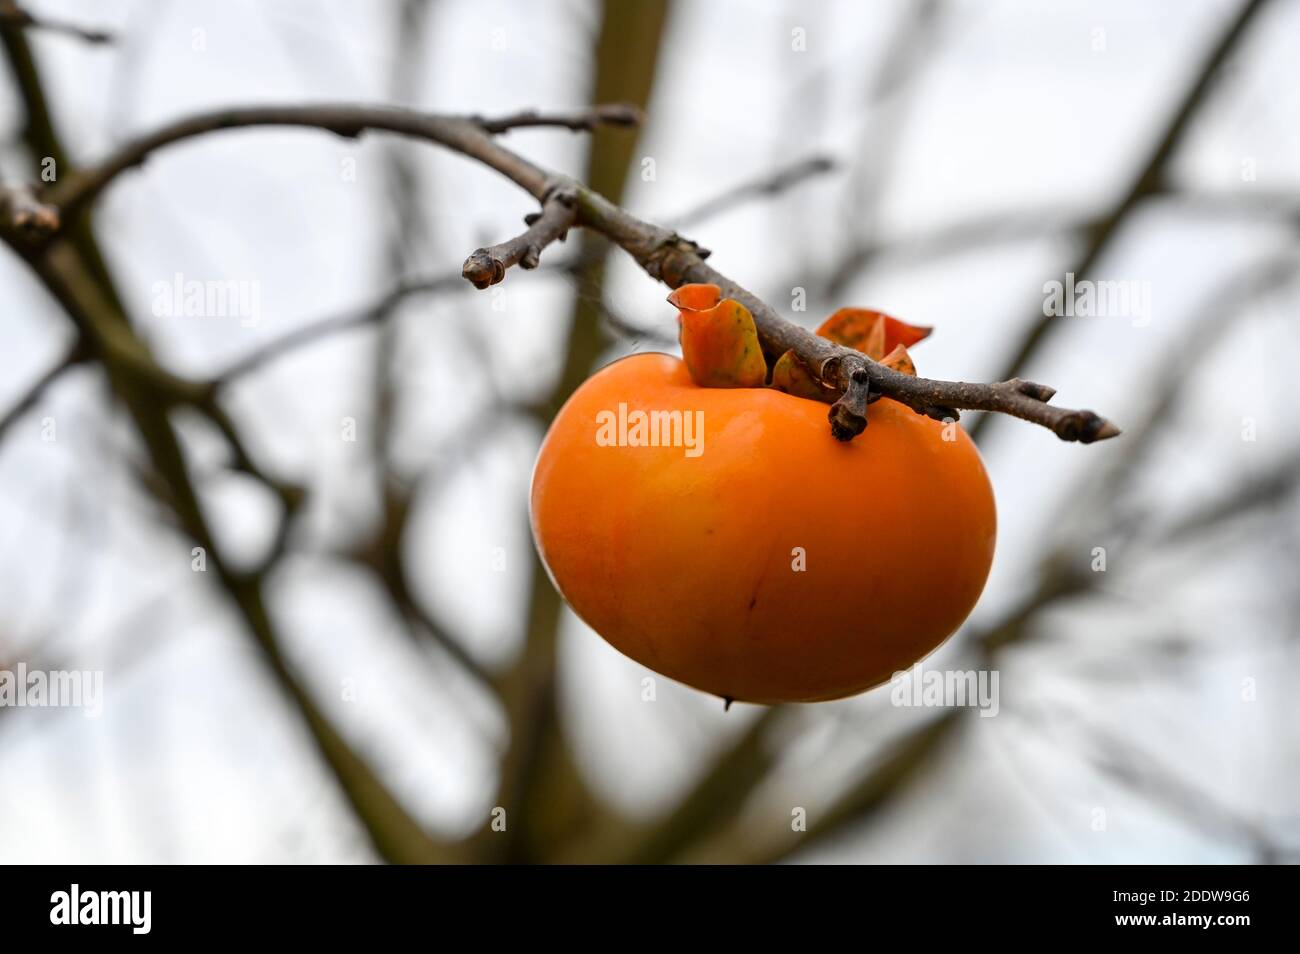 Bright orange Persimmon fruit growing on a tree in winter. Stock Photo